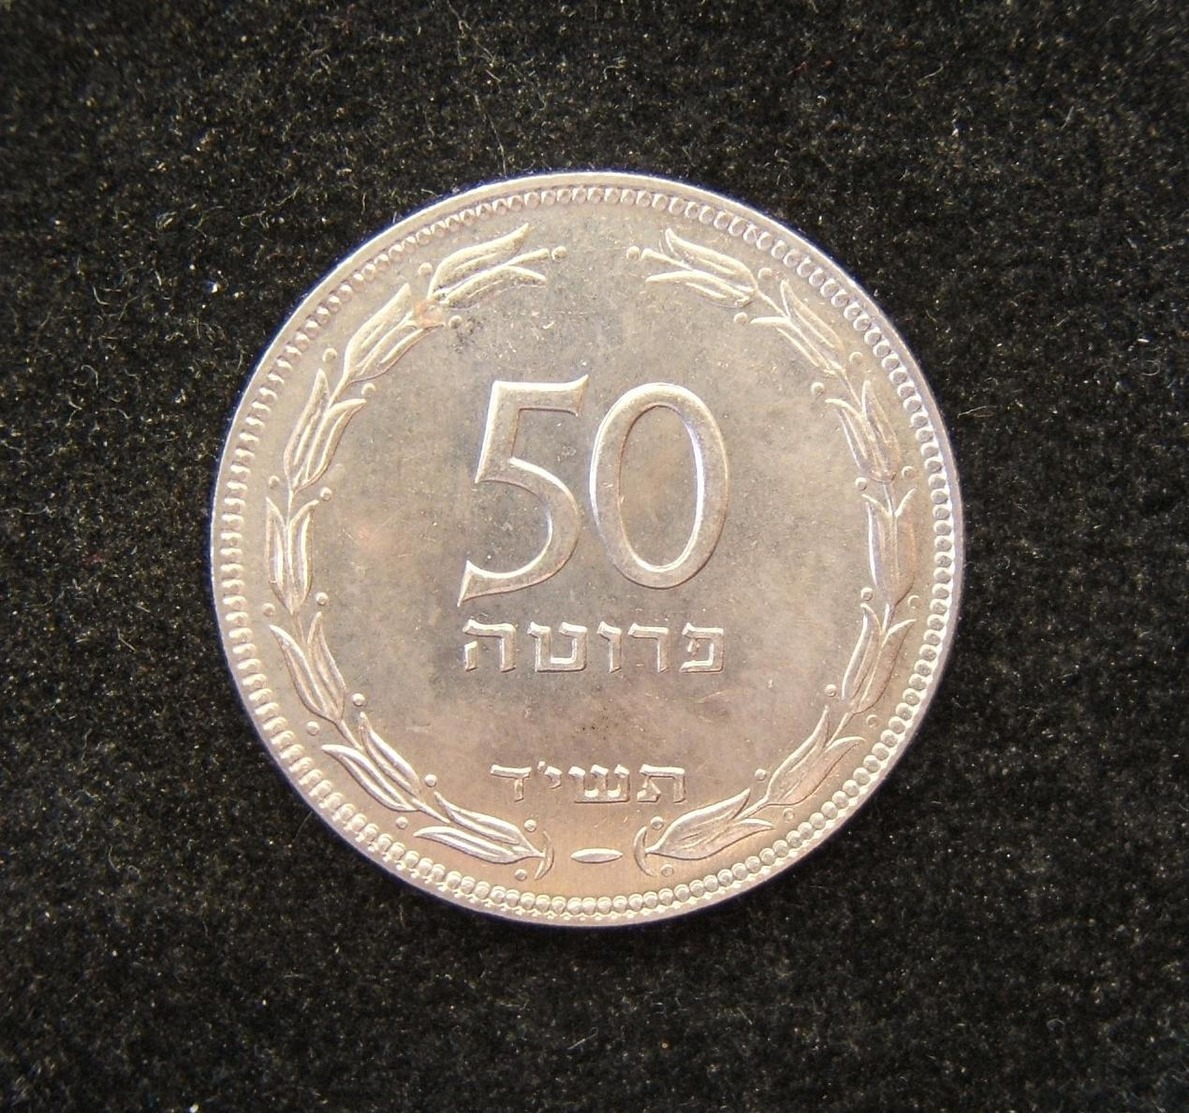 Israeli 50 Prutot 1954 Coin Without Pearl Non-rotated Die Milled Edge BU IMM-P17 - Israel